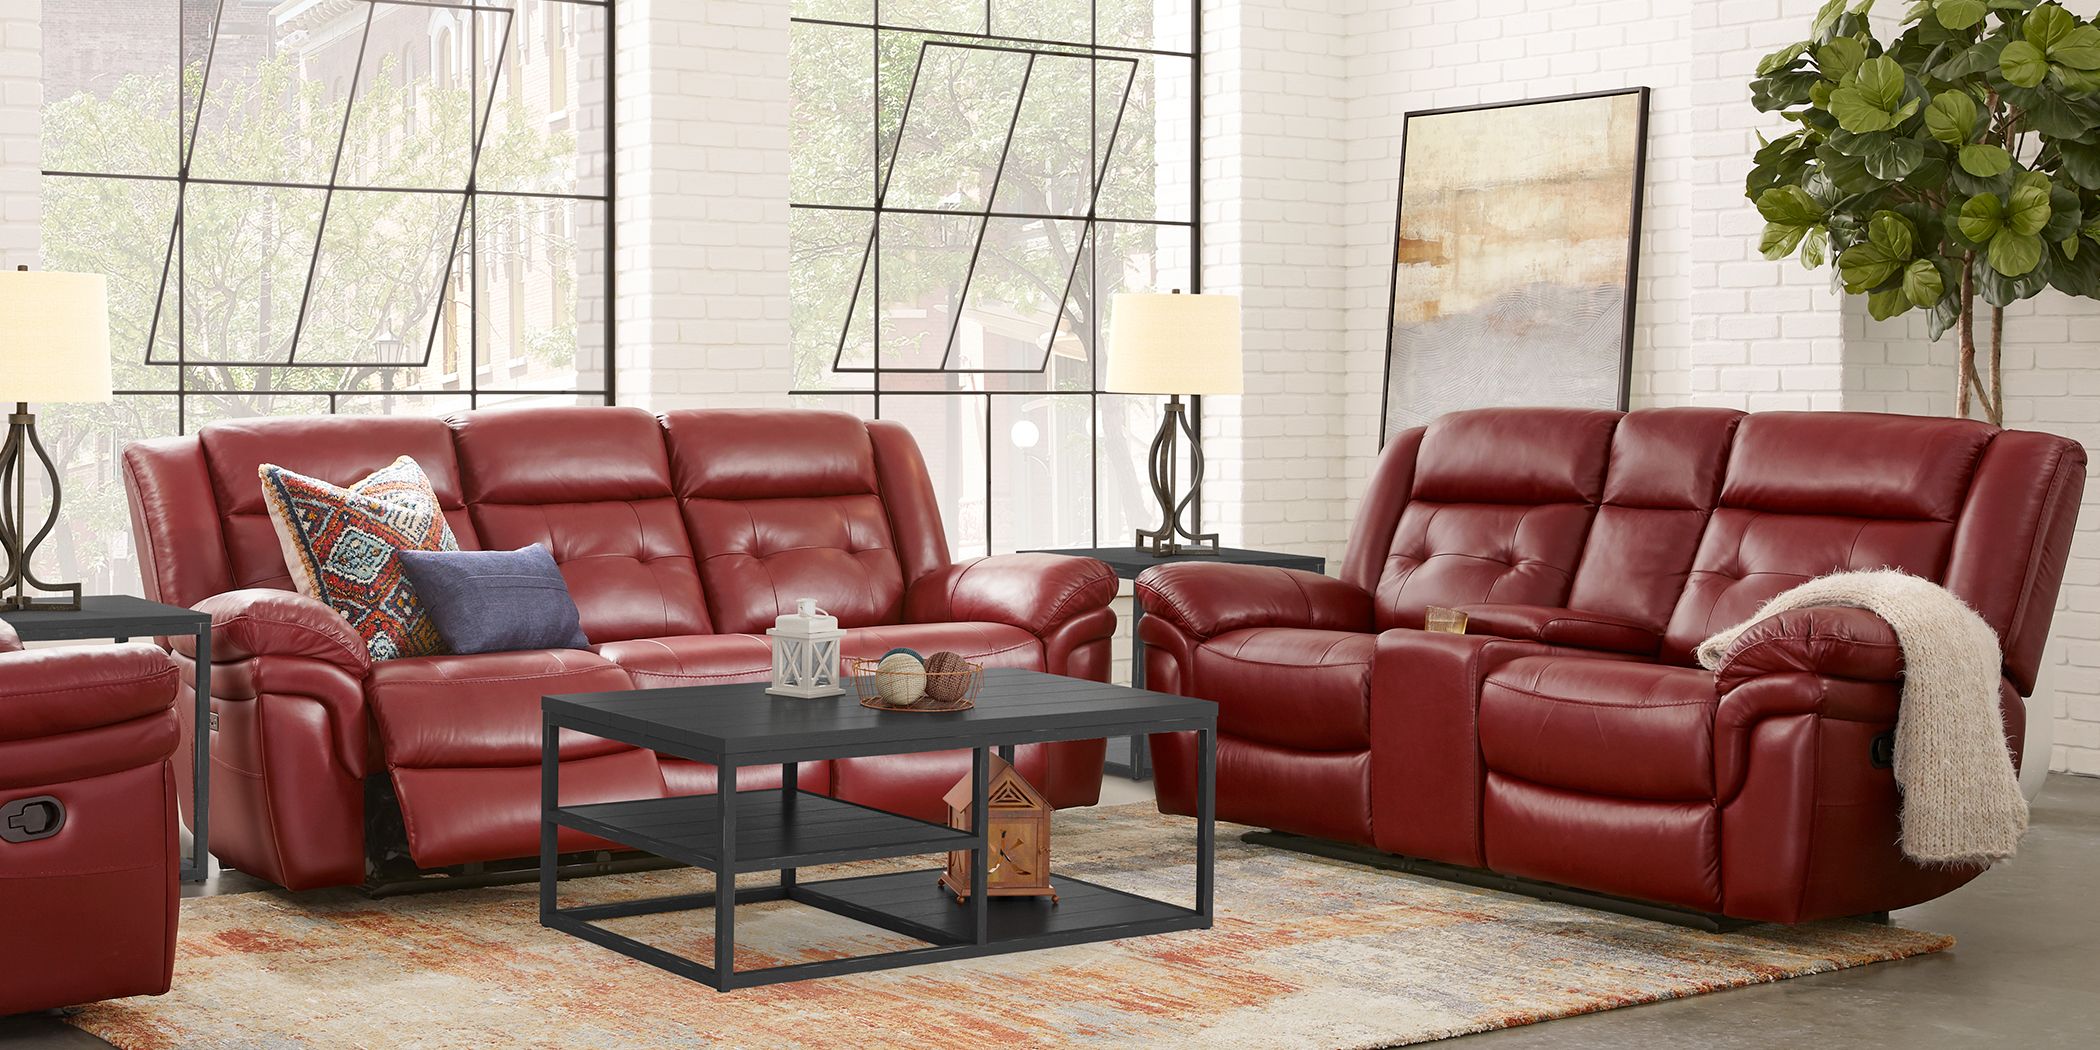 Ventoso Red Leather 3 Pc Reclining Living Room